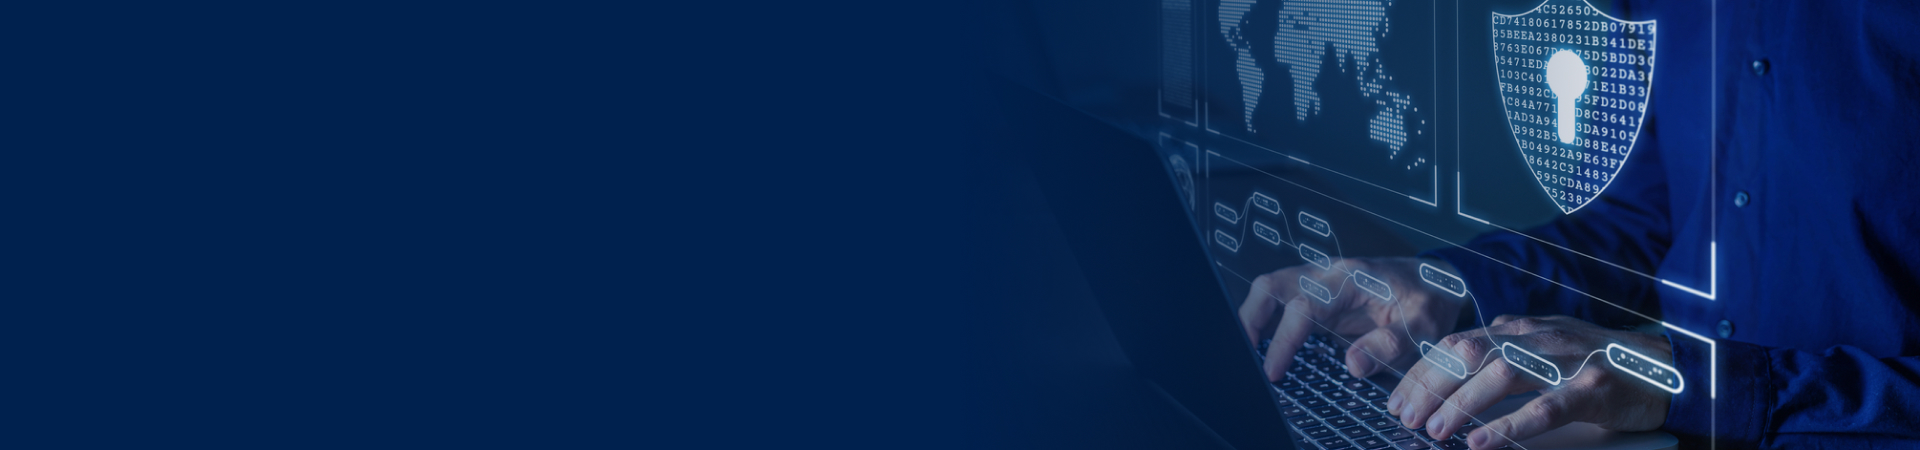 Acronis advanced email security solutions